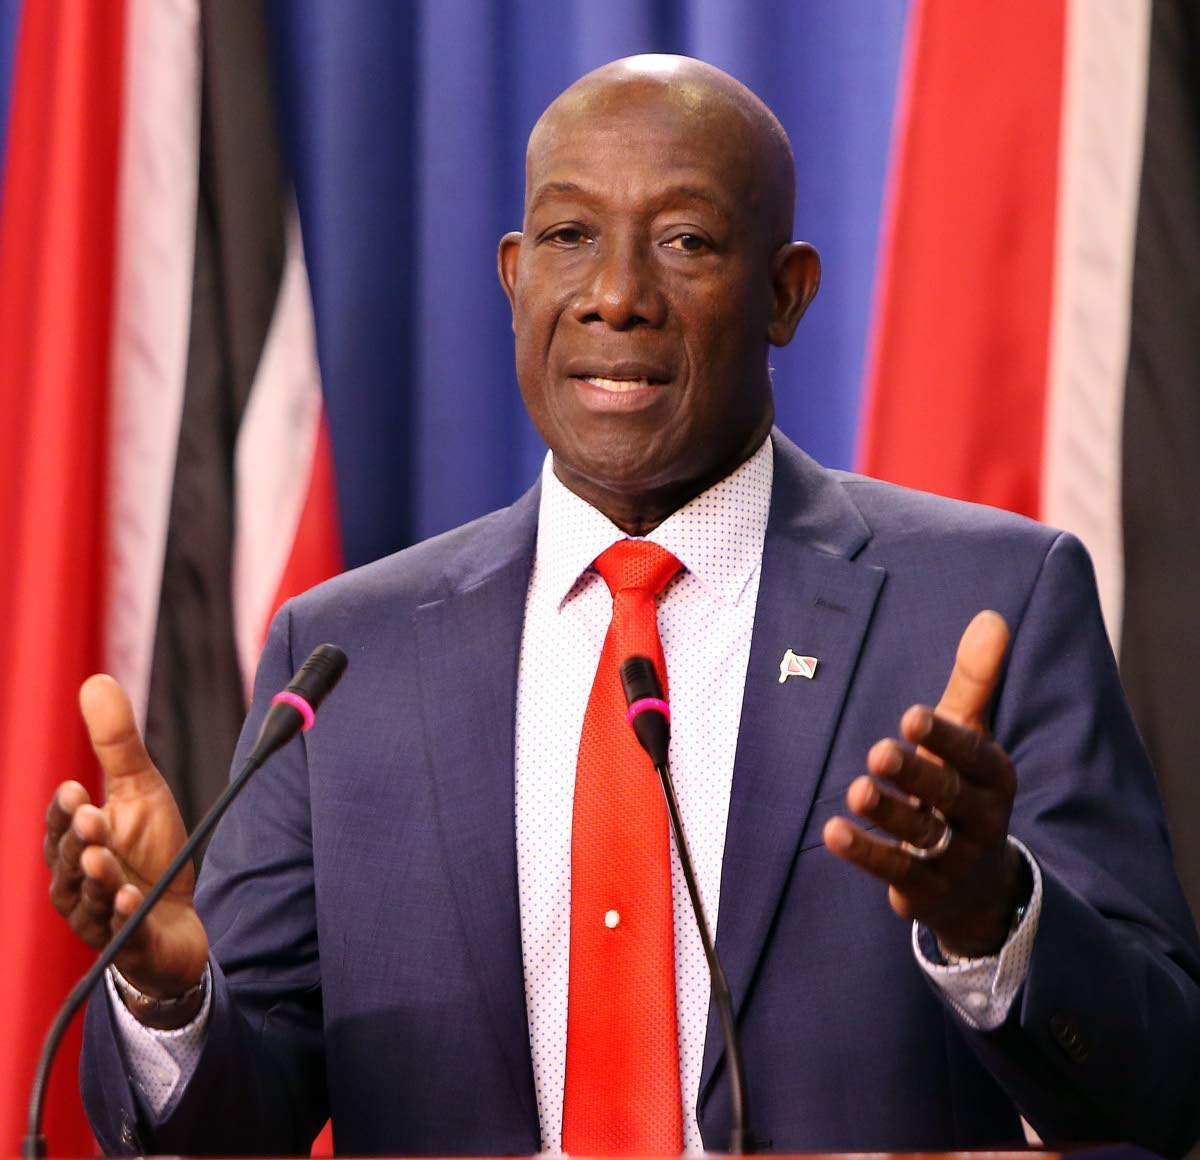 PM disappointed with Tewarie article ignoring Caricom’s efforts on Covid